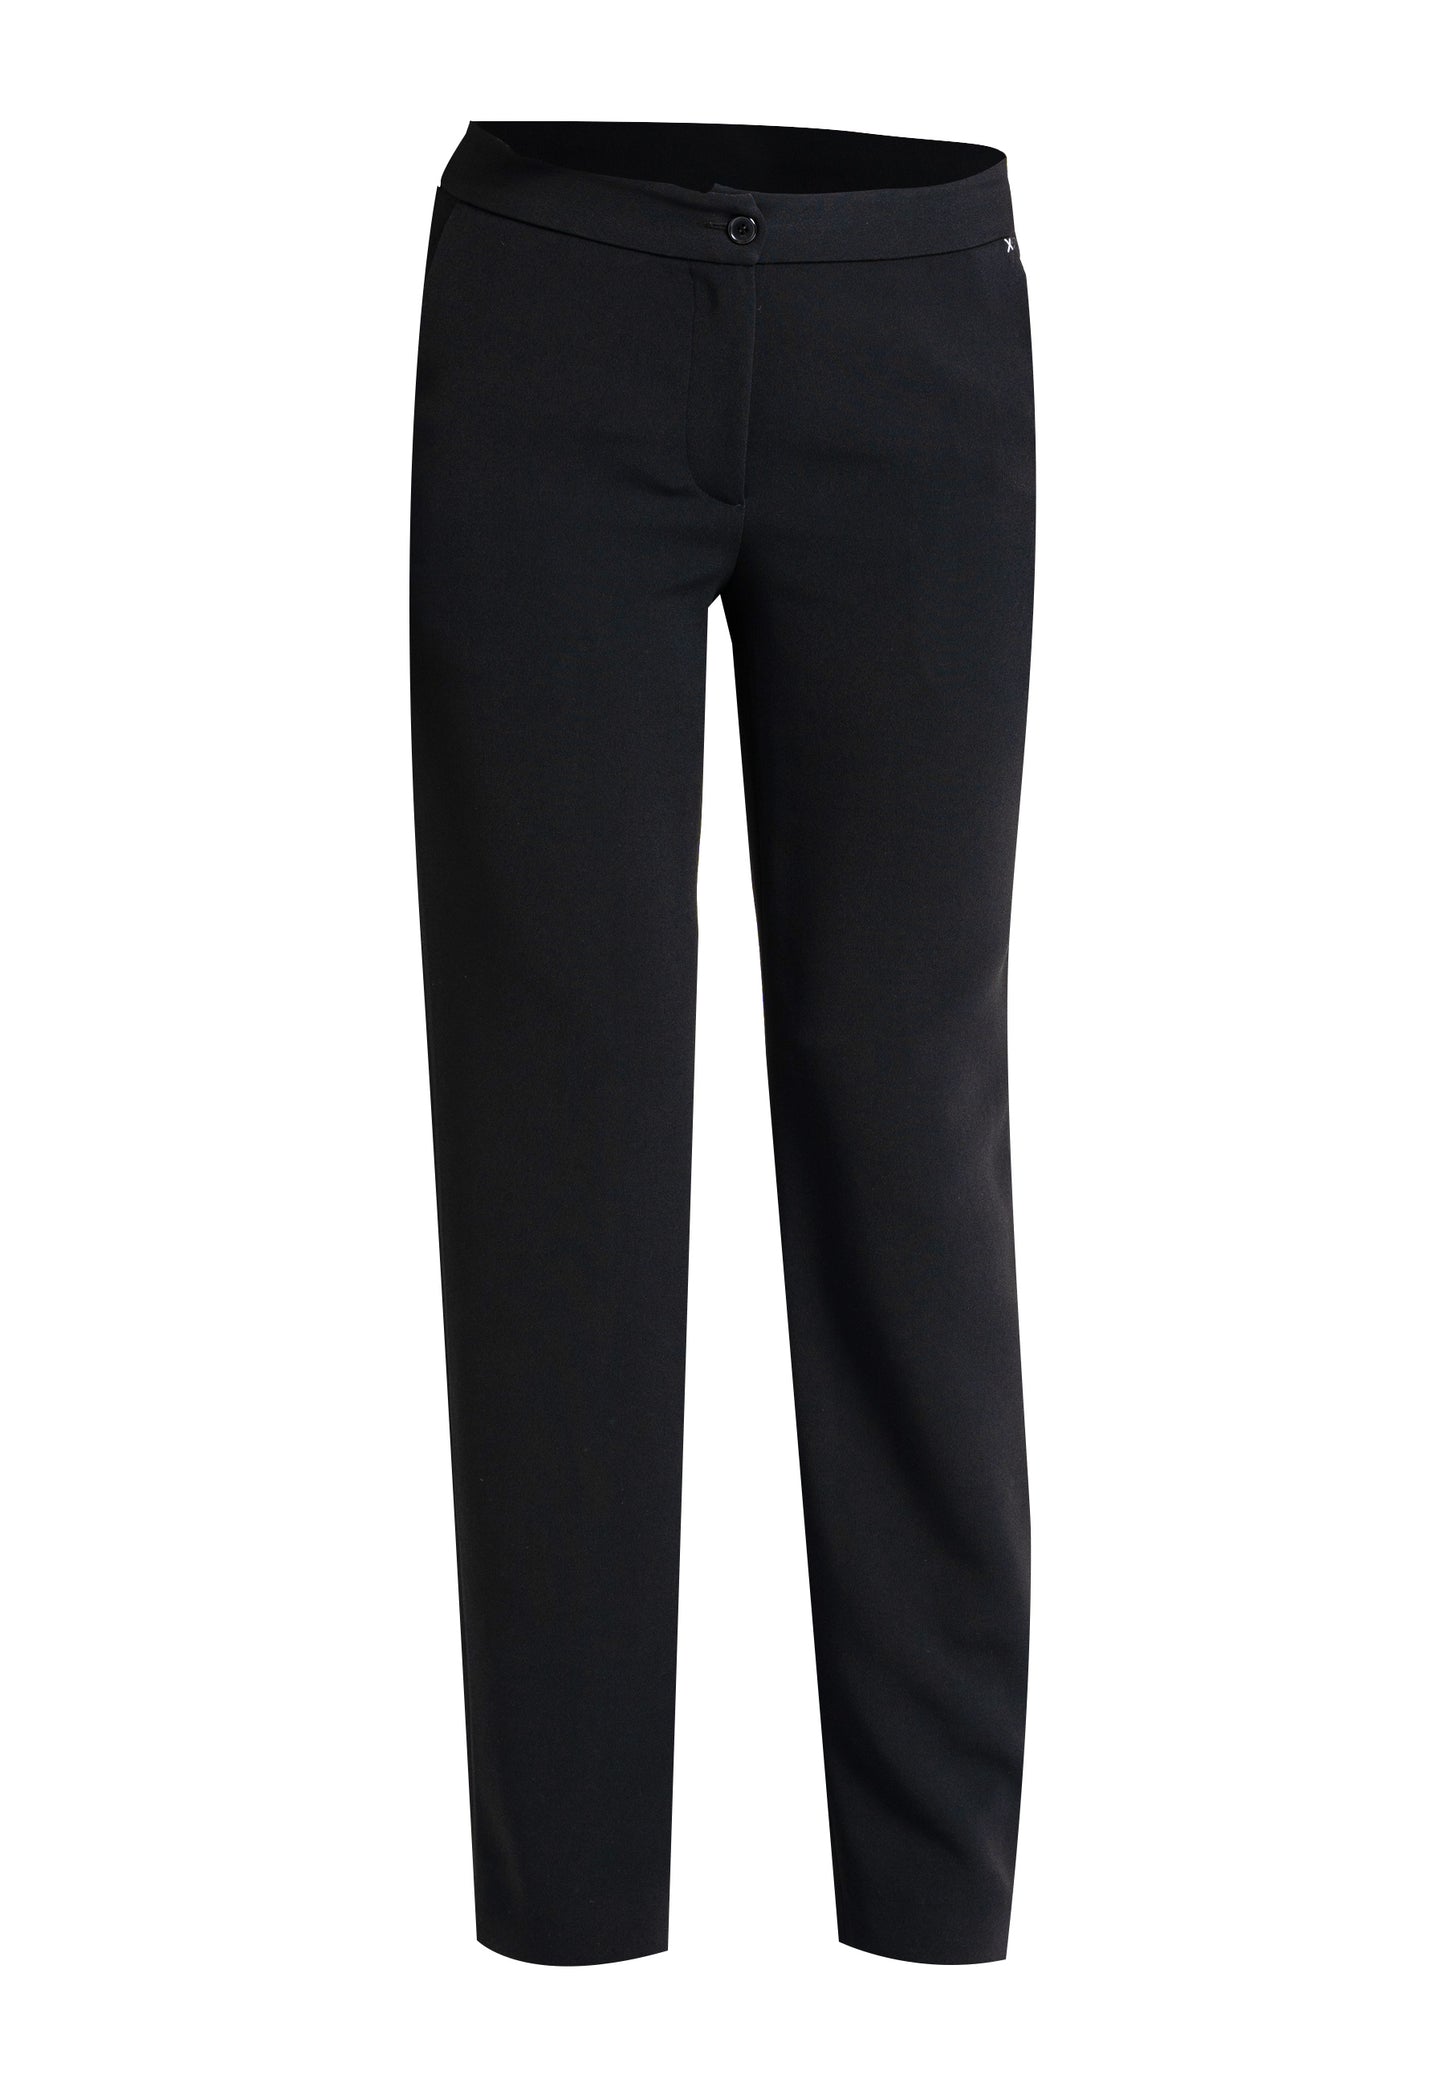 Darwin ankle-length trousers with side pockets